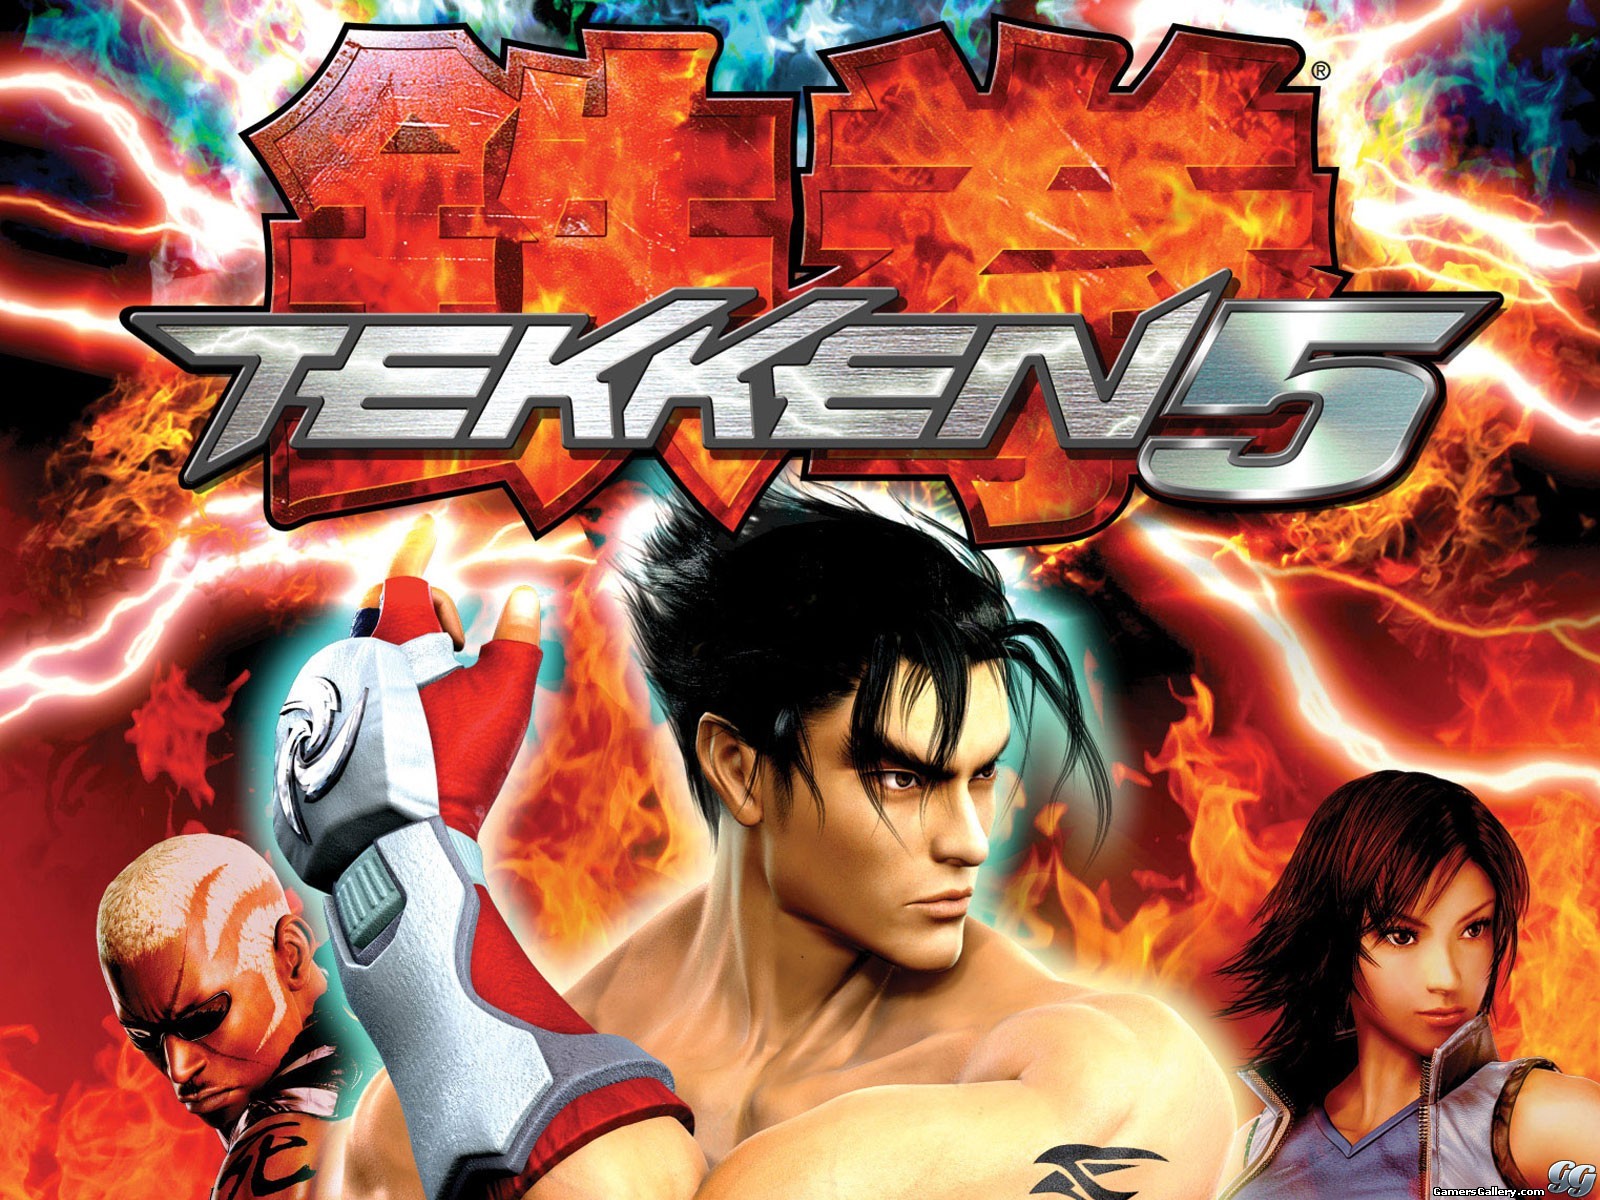 Information About Tekken Or Even Videos Related To